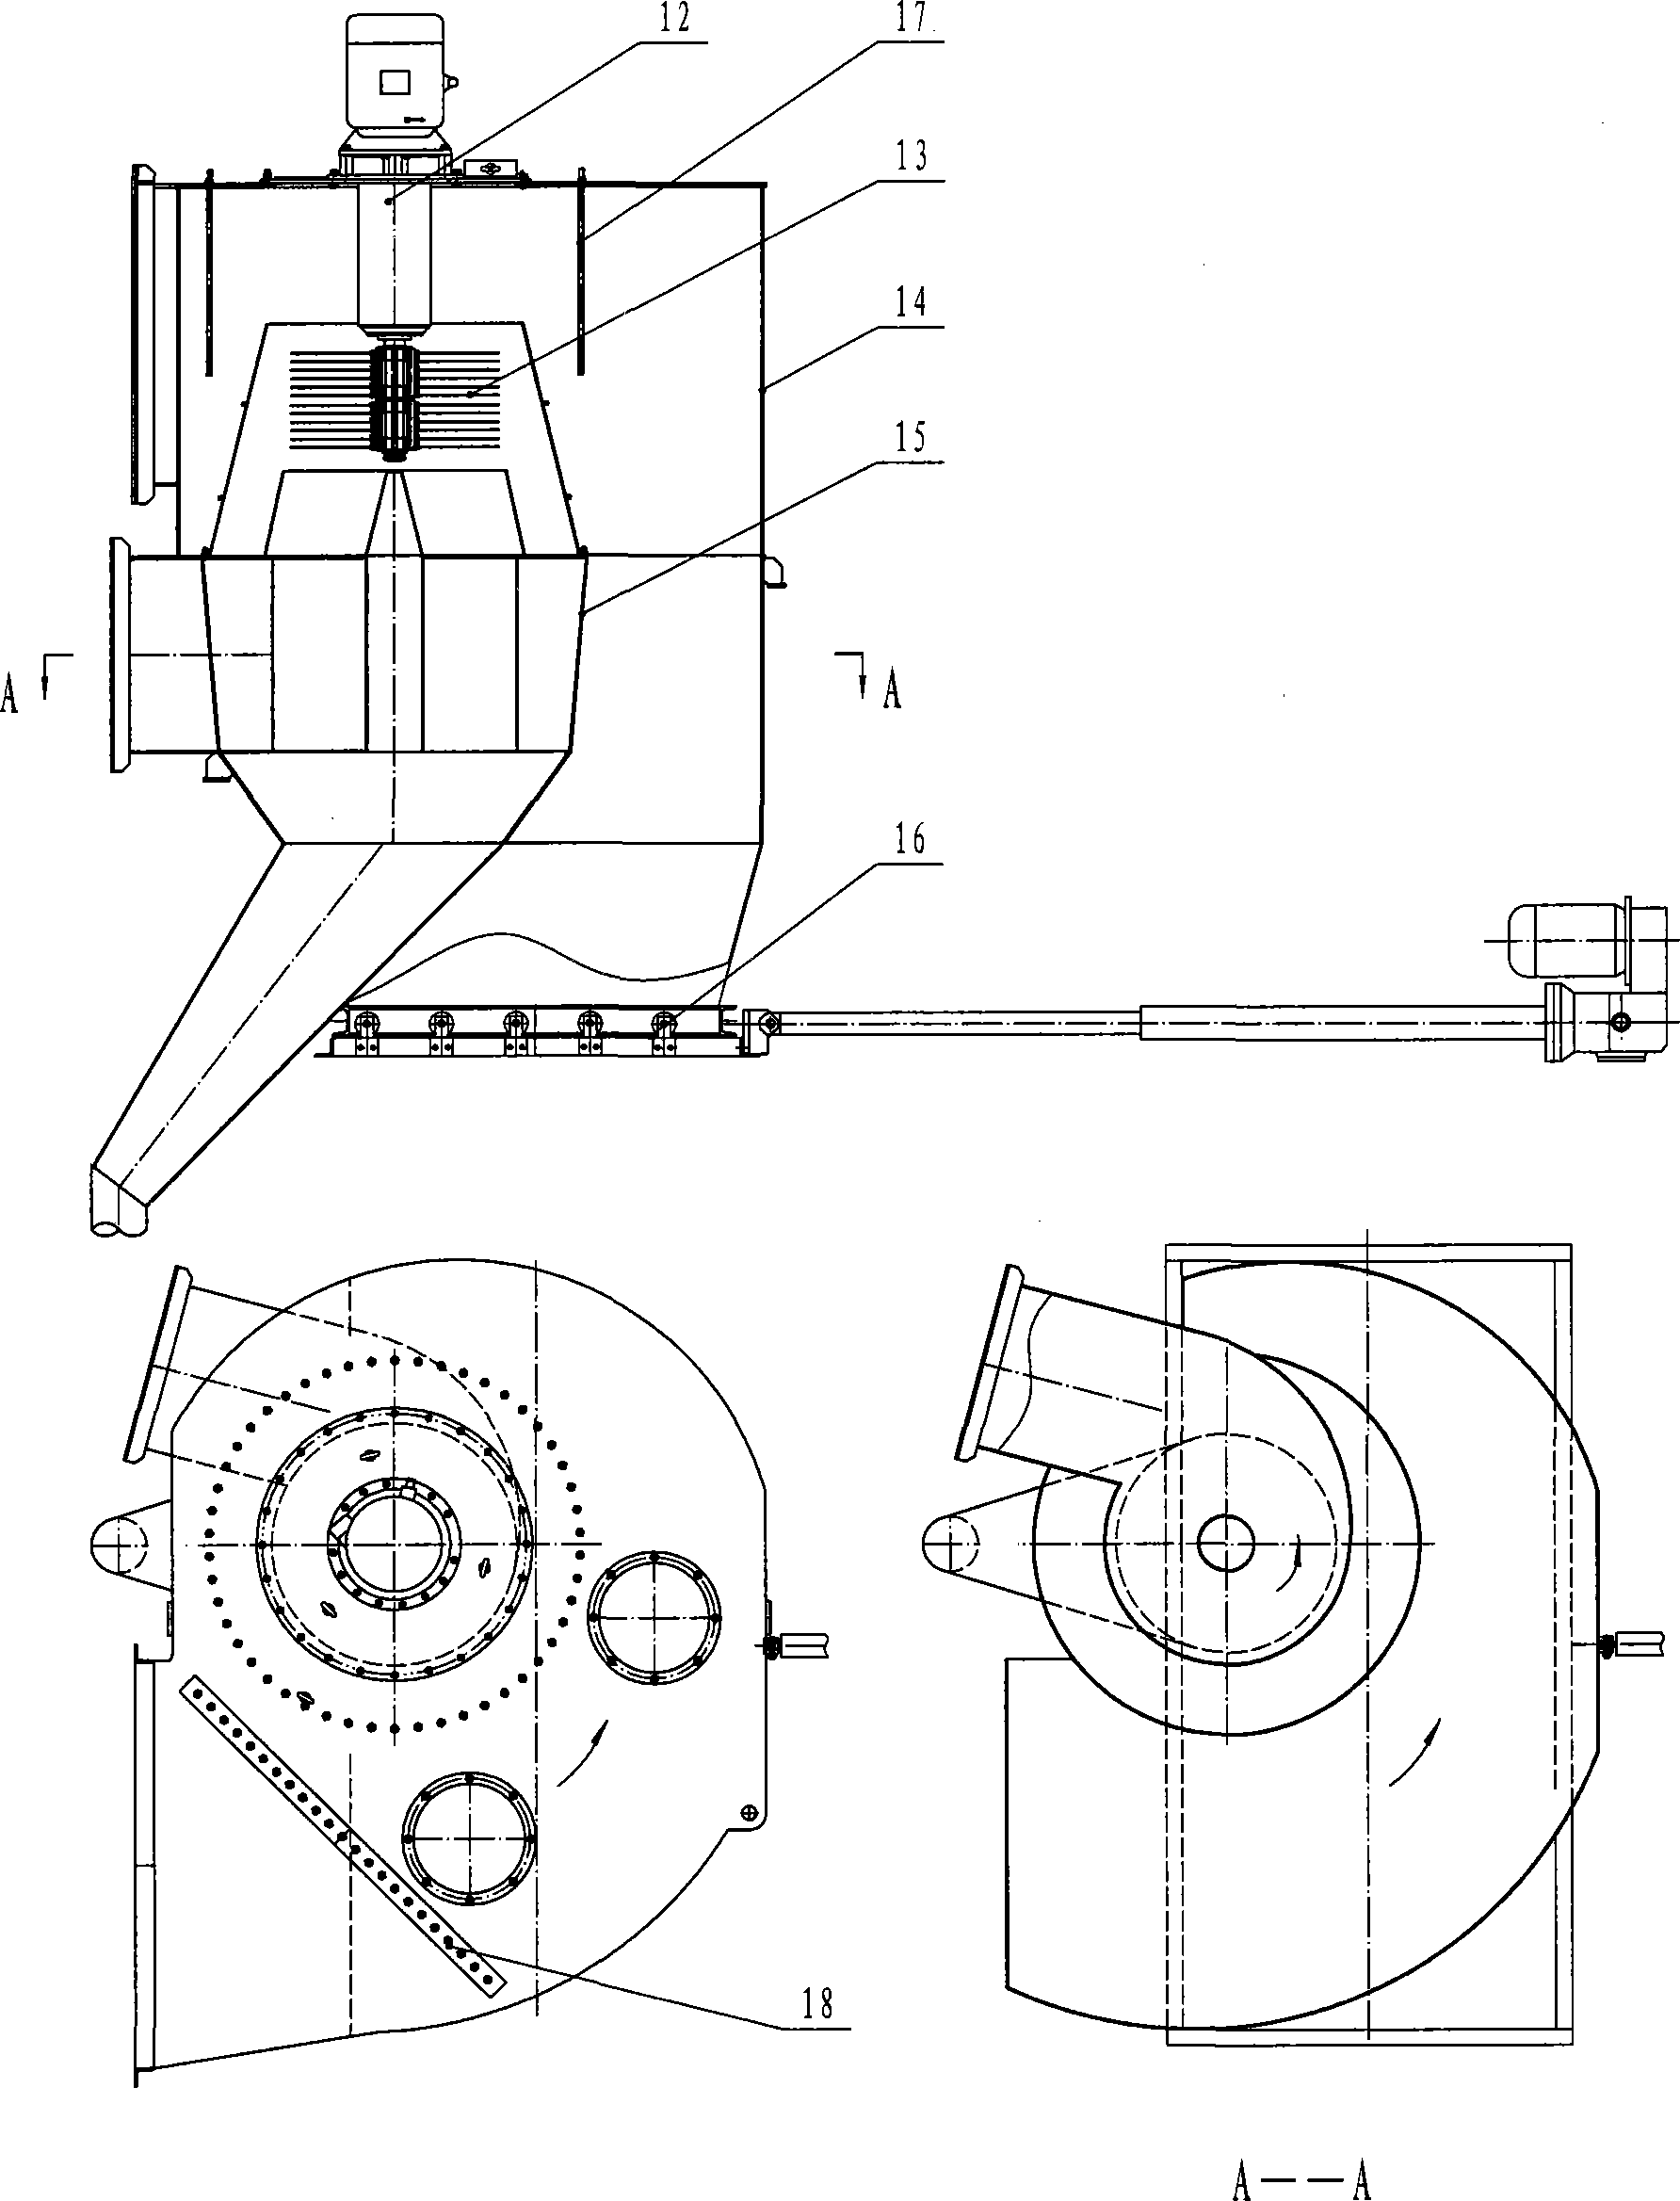 Wind power sorting device